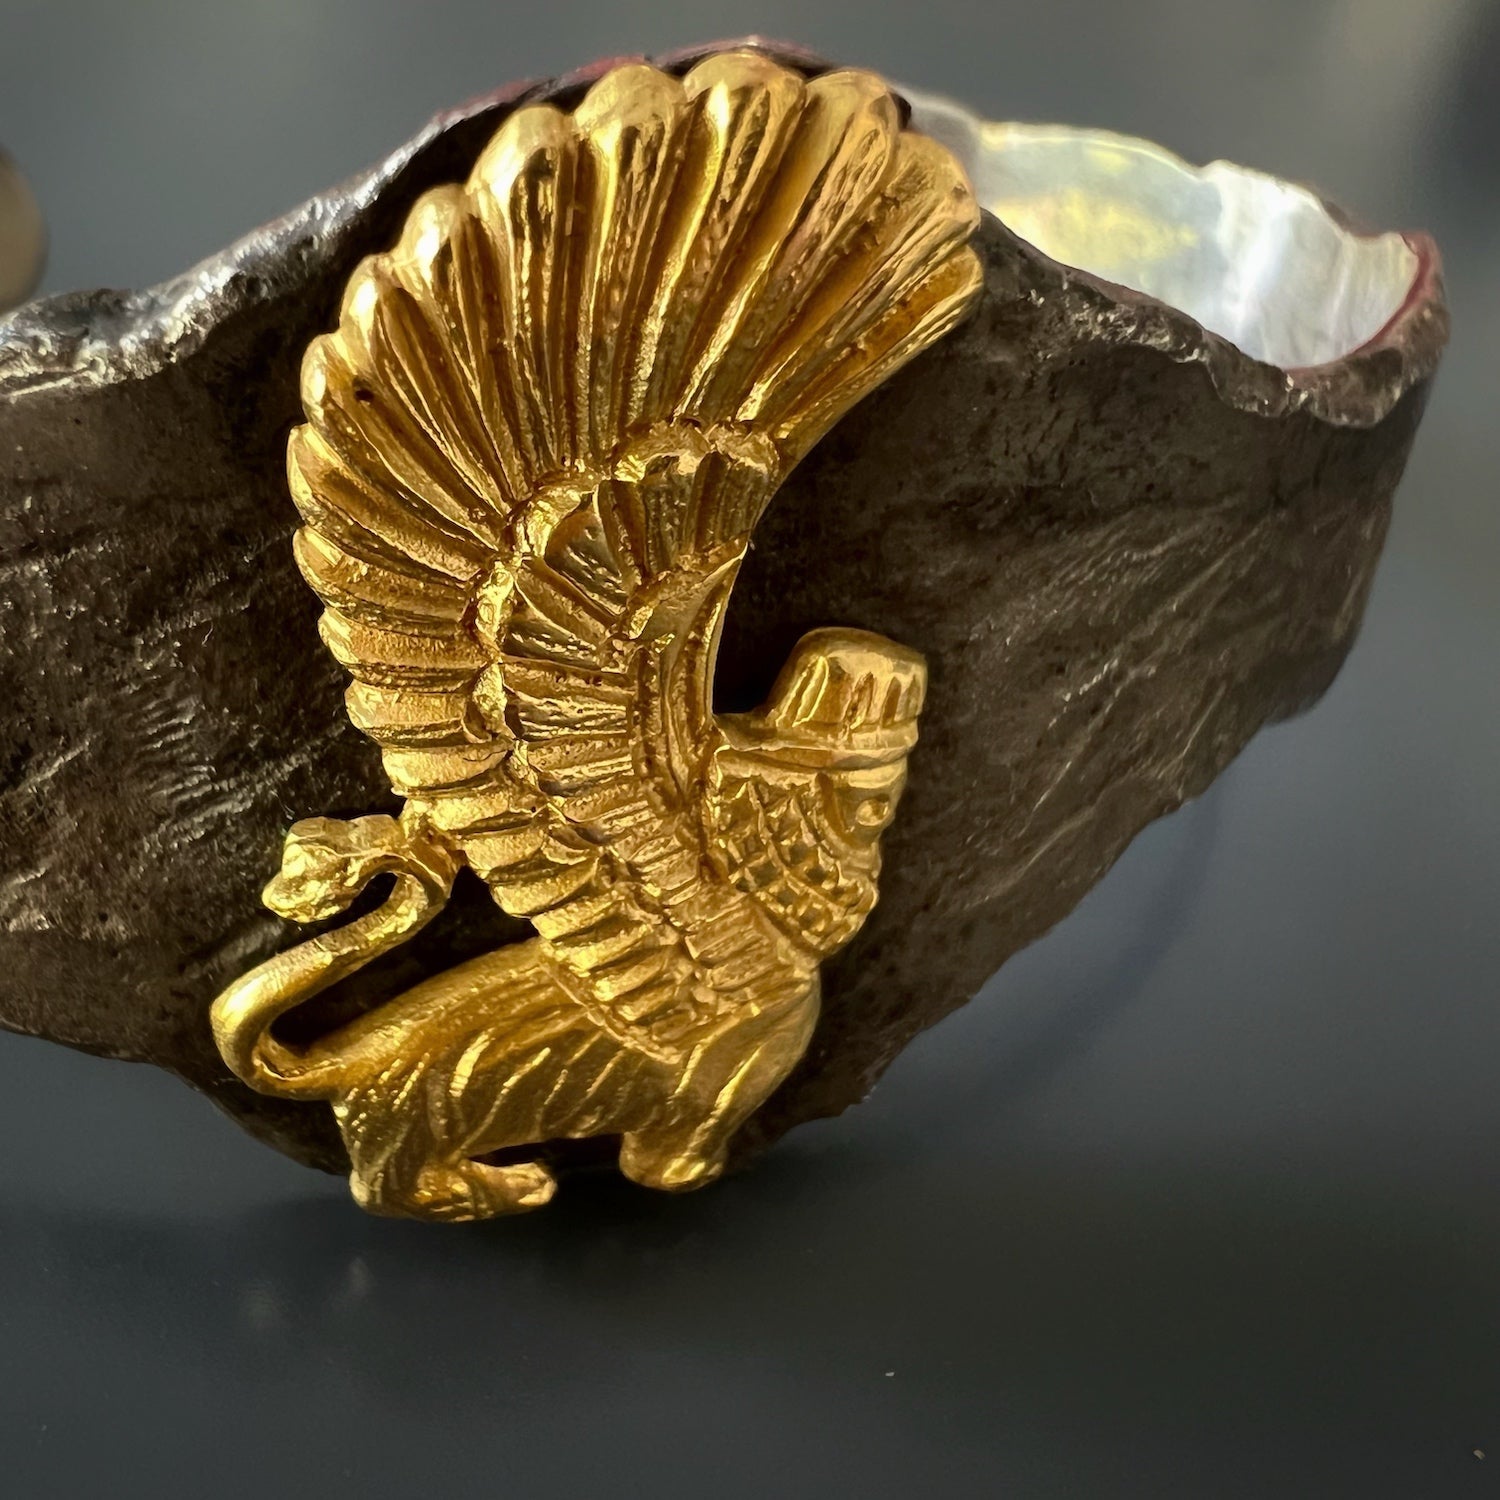 Handcrafted in the USA: Assyrian Gold Lion Cuff Bracelet in Sterling Silver and 18k Gold